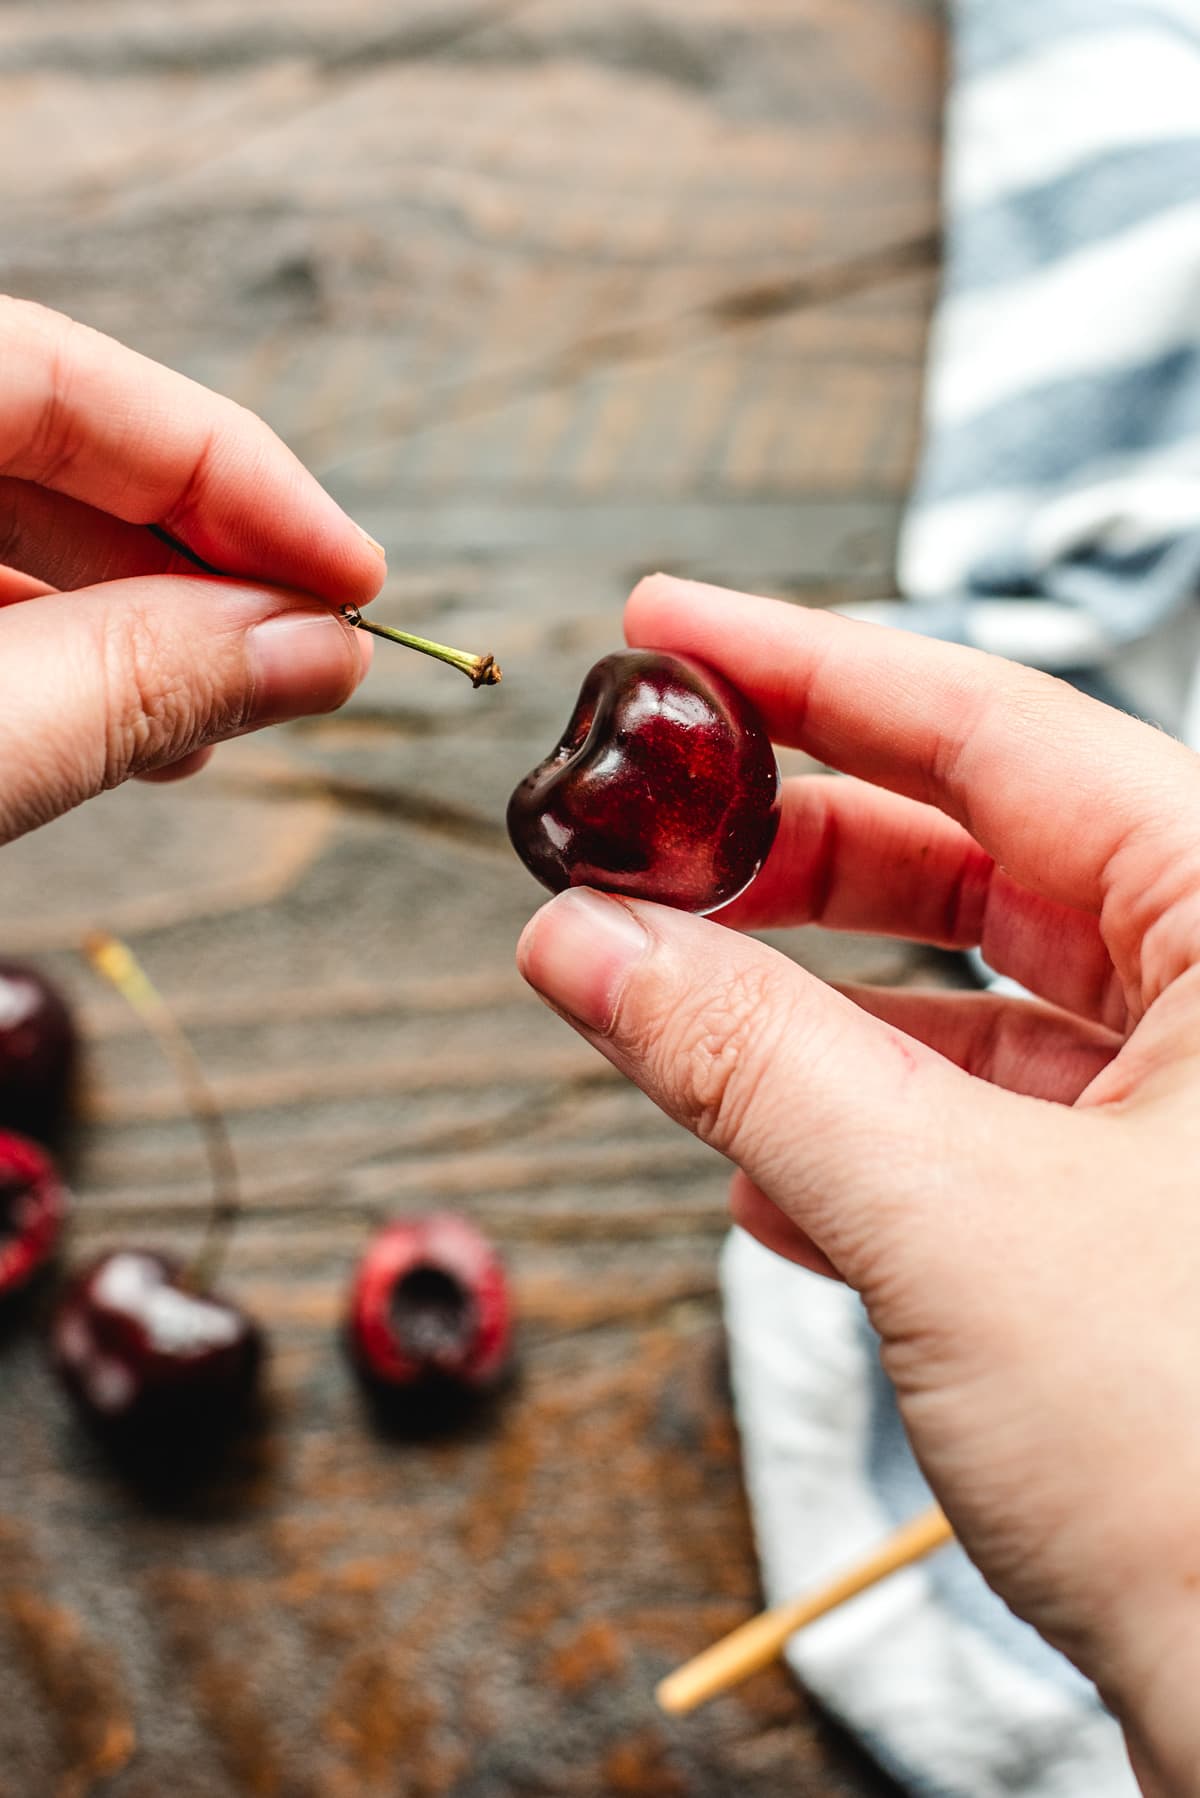 Holding a cherry in one hand and removing the pit with the other hand.